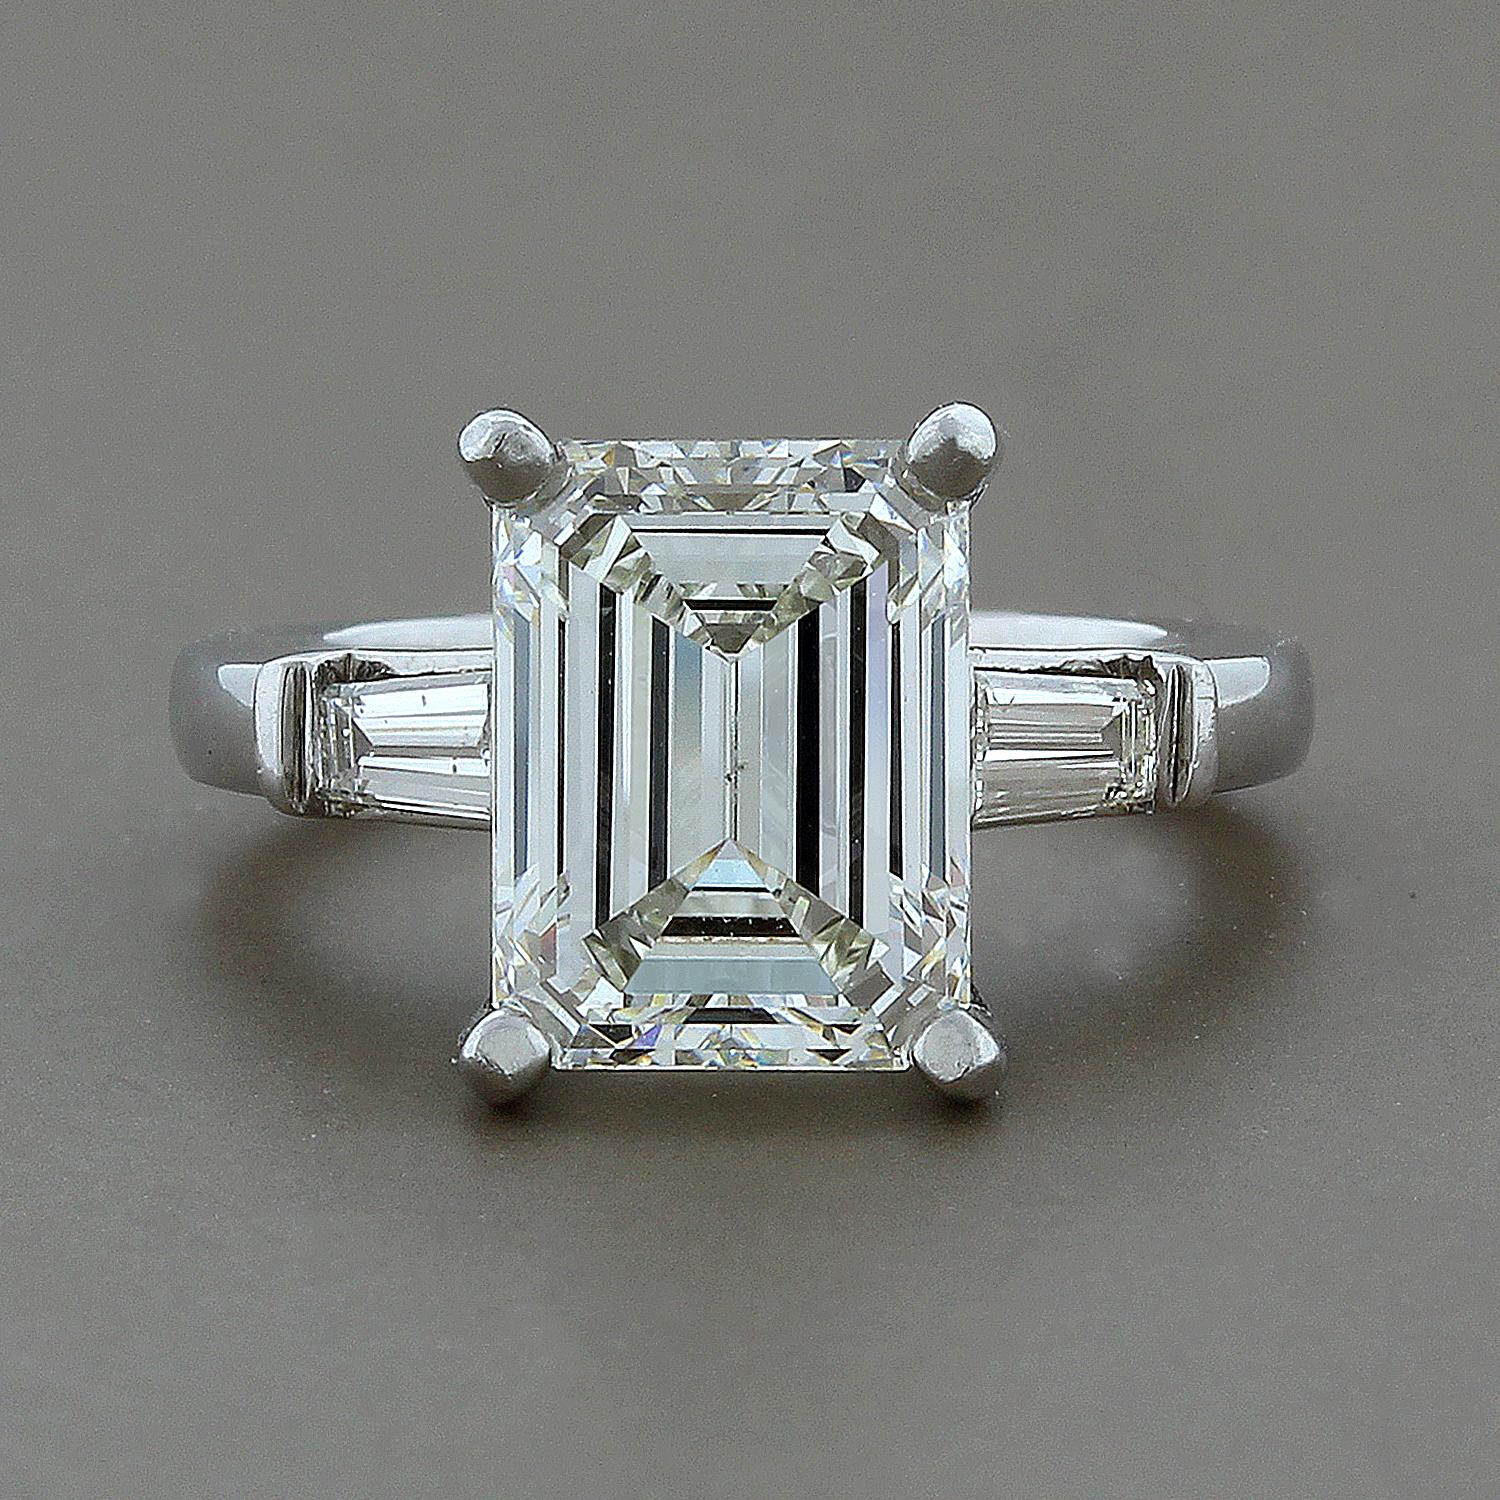 A beautiful 3.57 carat emerald cut diamond traditionally set with two tapered side diamond baguettes, totaling 0.25 carats.  The emerald cut diamond is GIA certified showing J color and VS2 clarity.  The polish and symmetry are both stated as